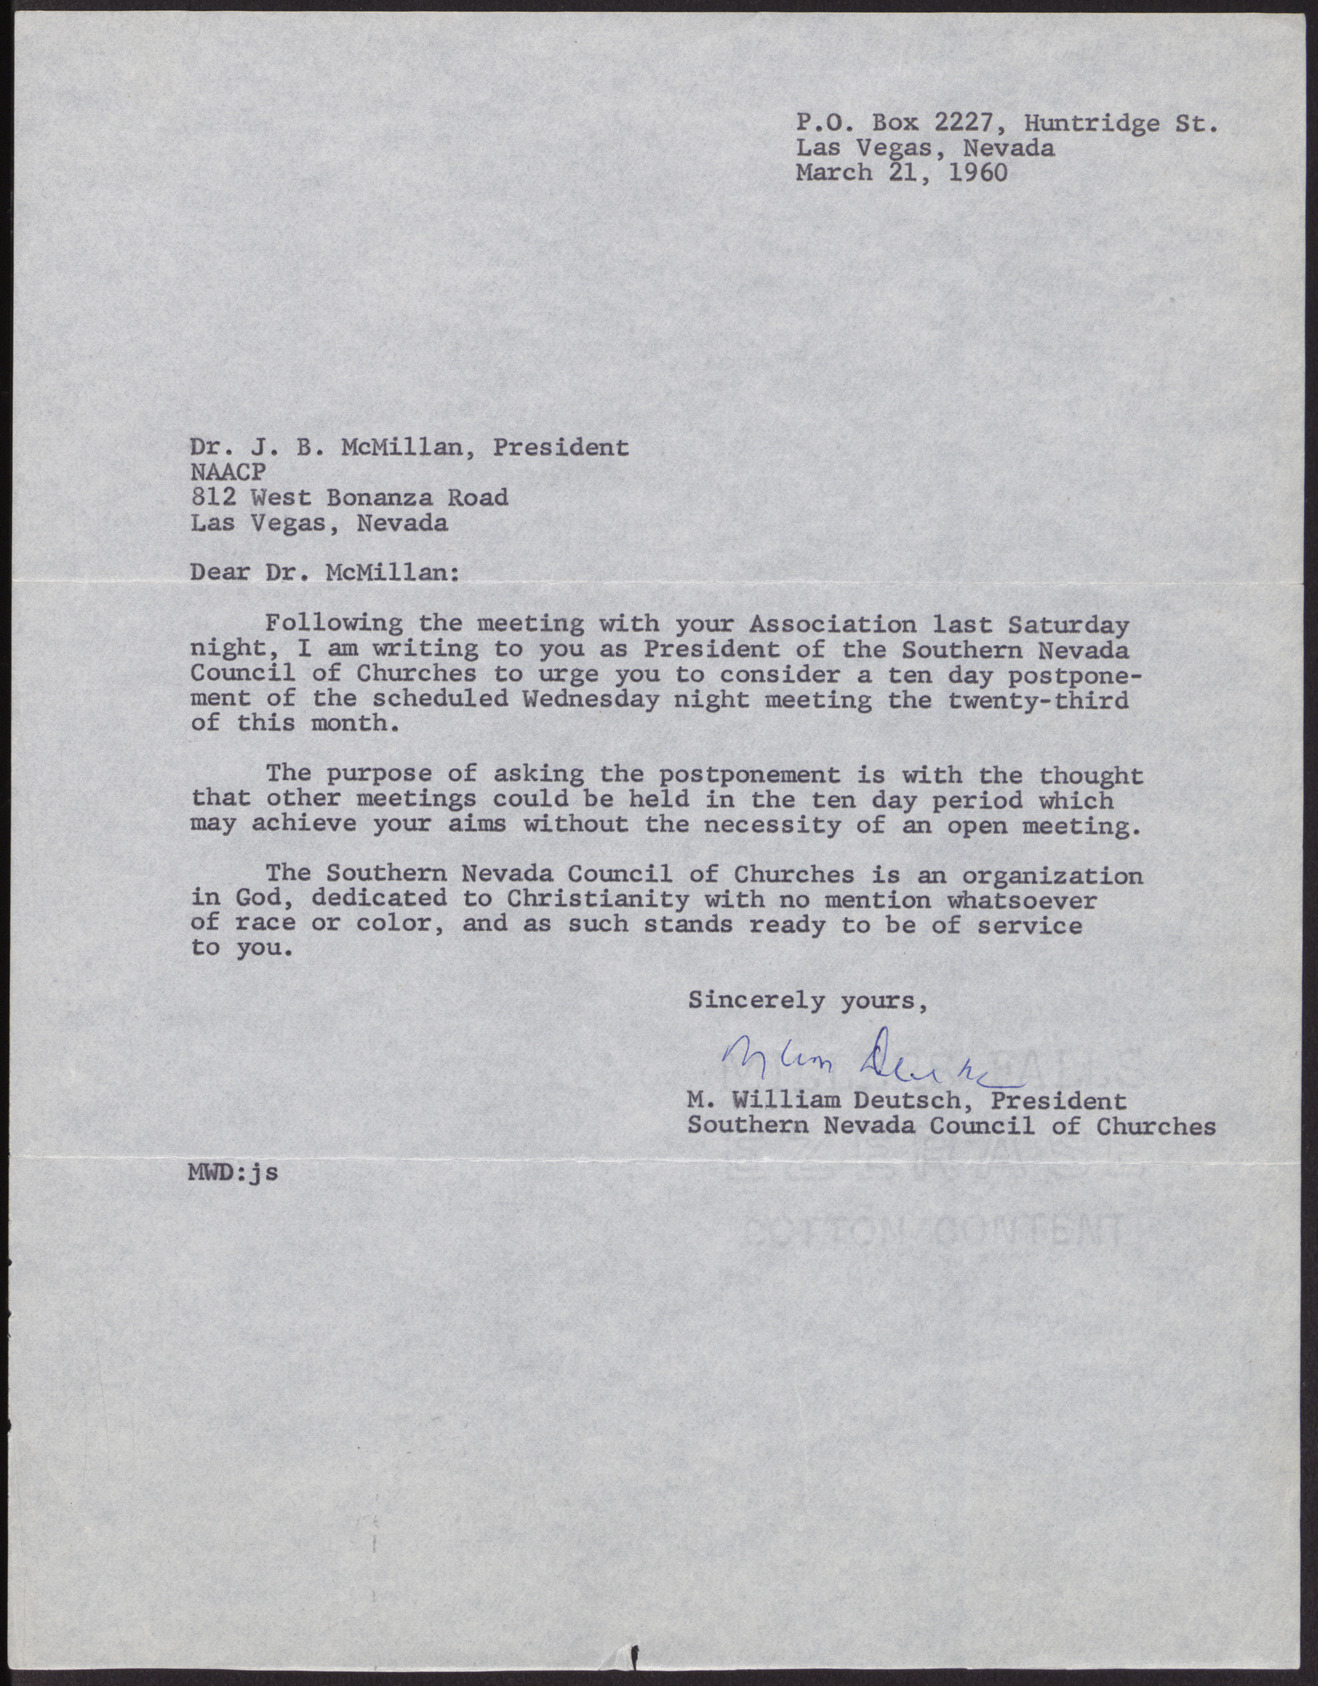 Letter to Dr. J. B. McMillan from M. William Deutsch, March 21, 1960